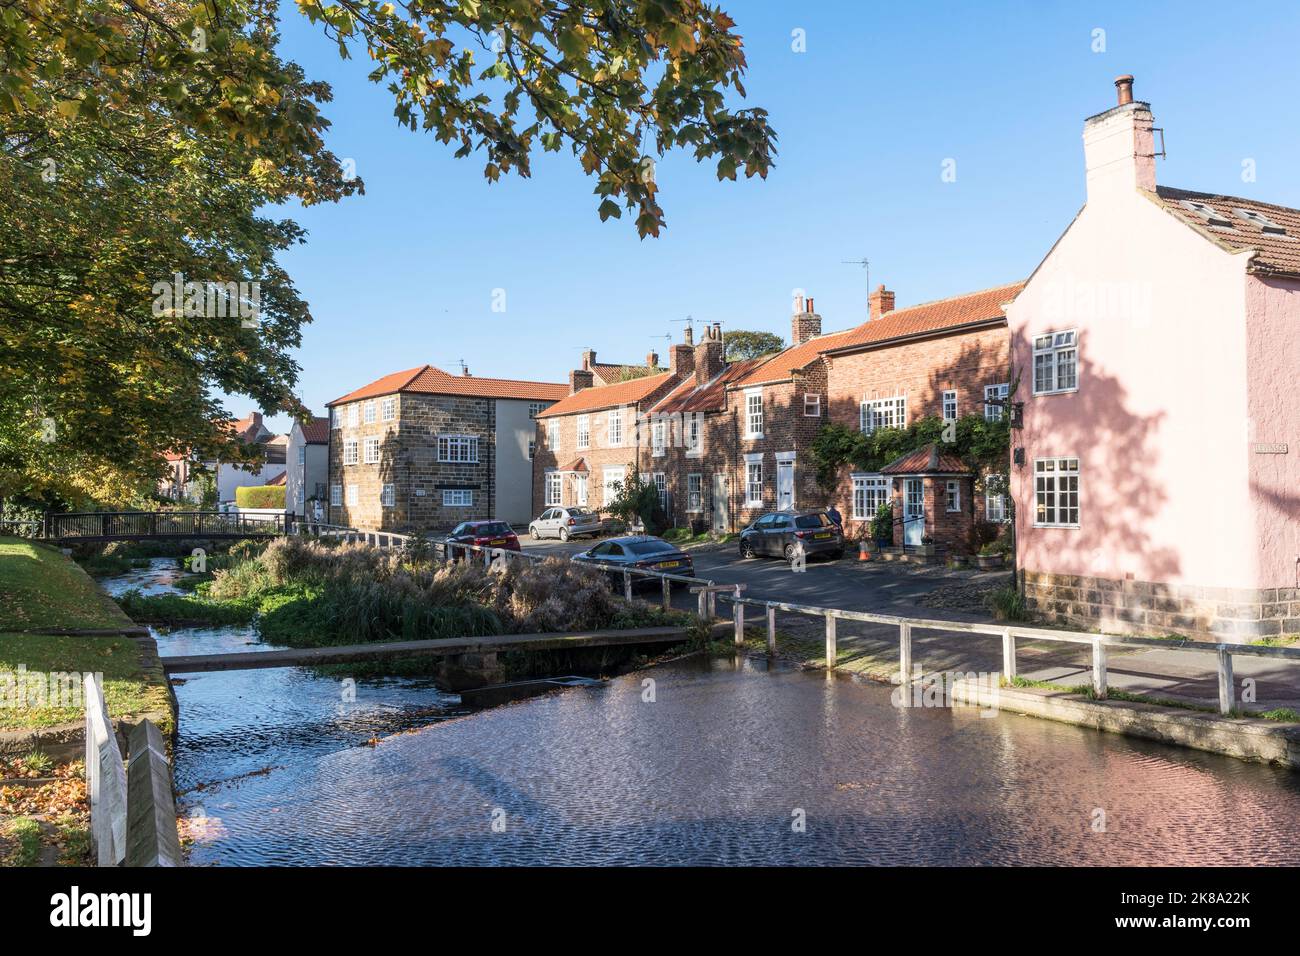 The river Leven in Stokesley, North Yorkshire, England, UK Stock Photo